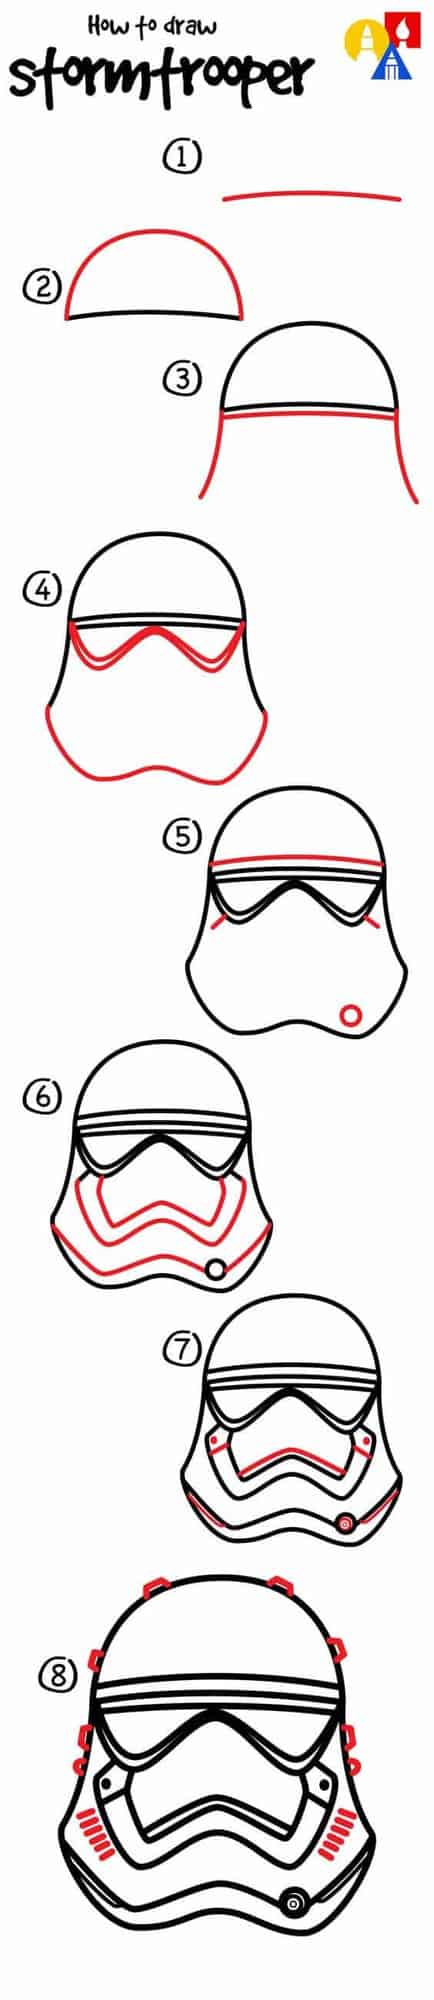 How to Draw a Storm Trooper Helmet by Art for Kids Hub | Star Wars Crafts, Recipes and Gift Ideas